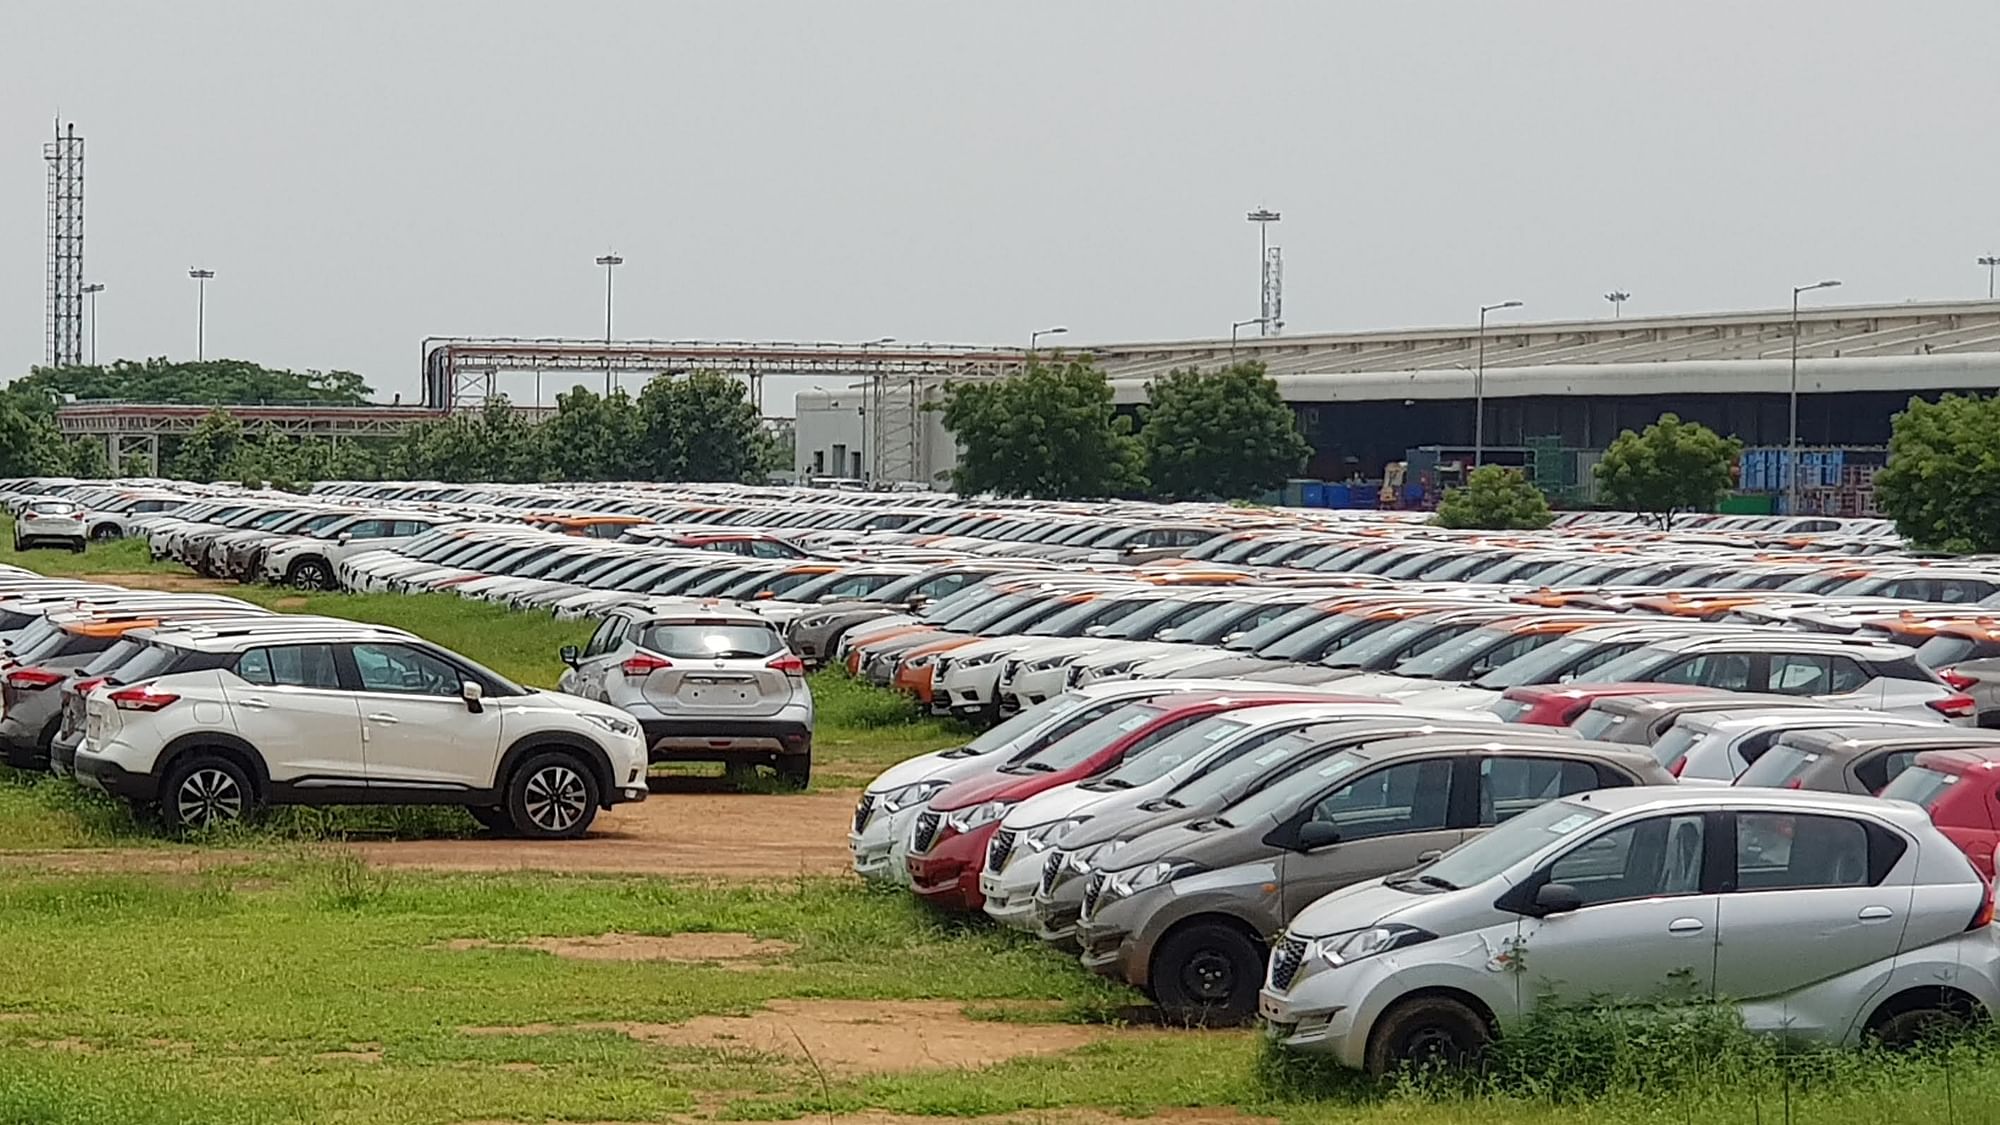 Nissan and Datsun vehicles ready to be shipped at the company’s plant in Chennai.